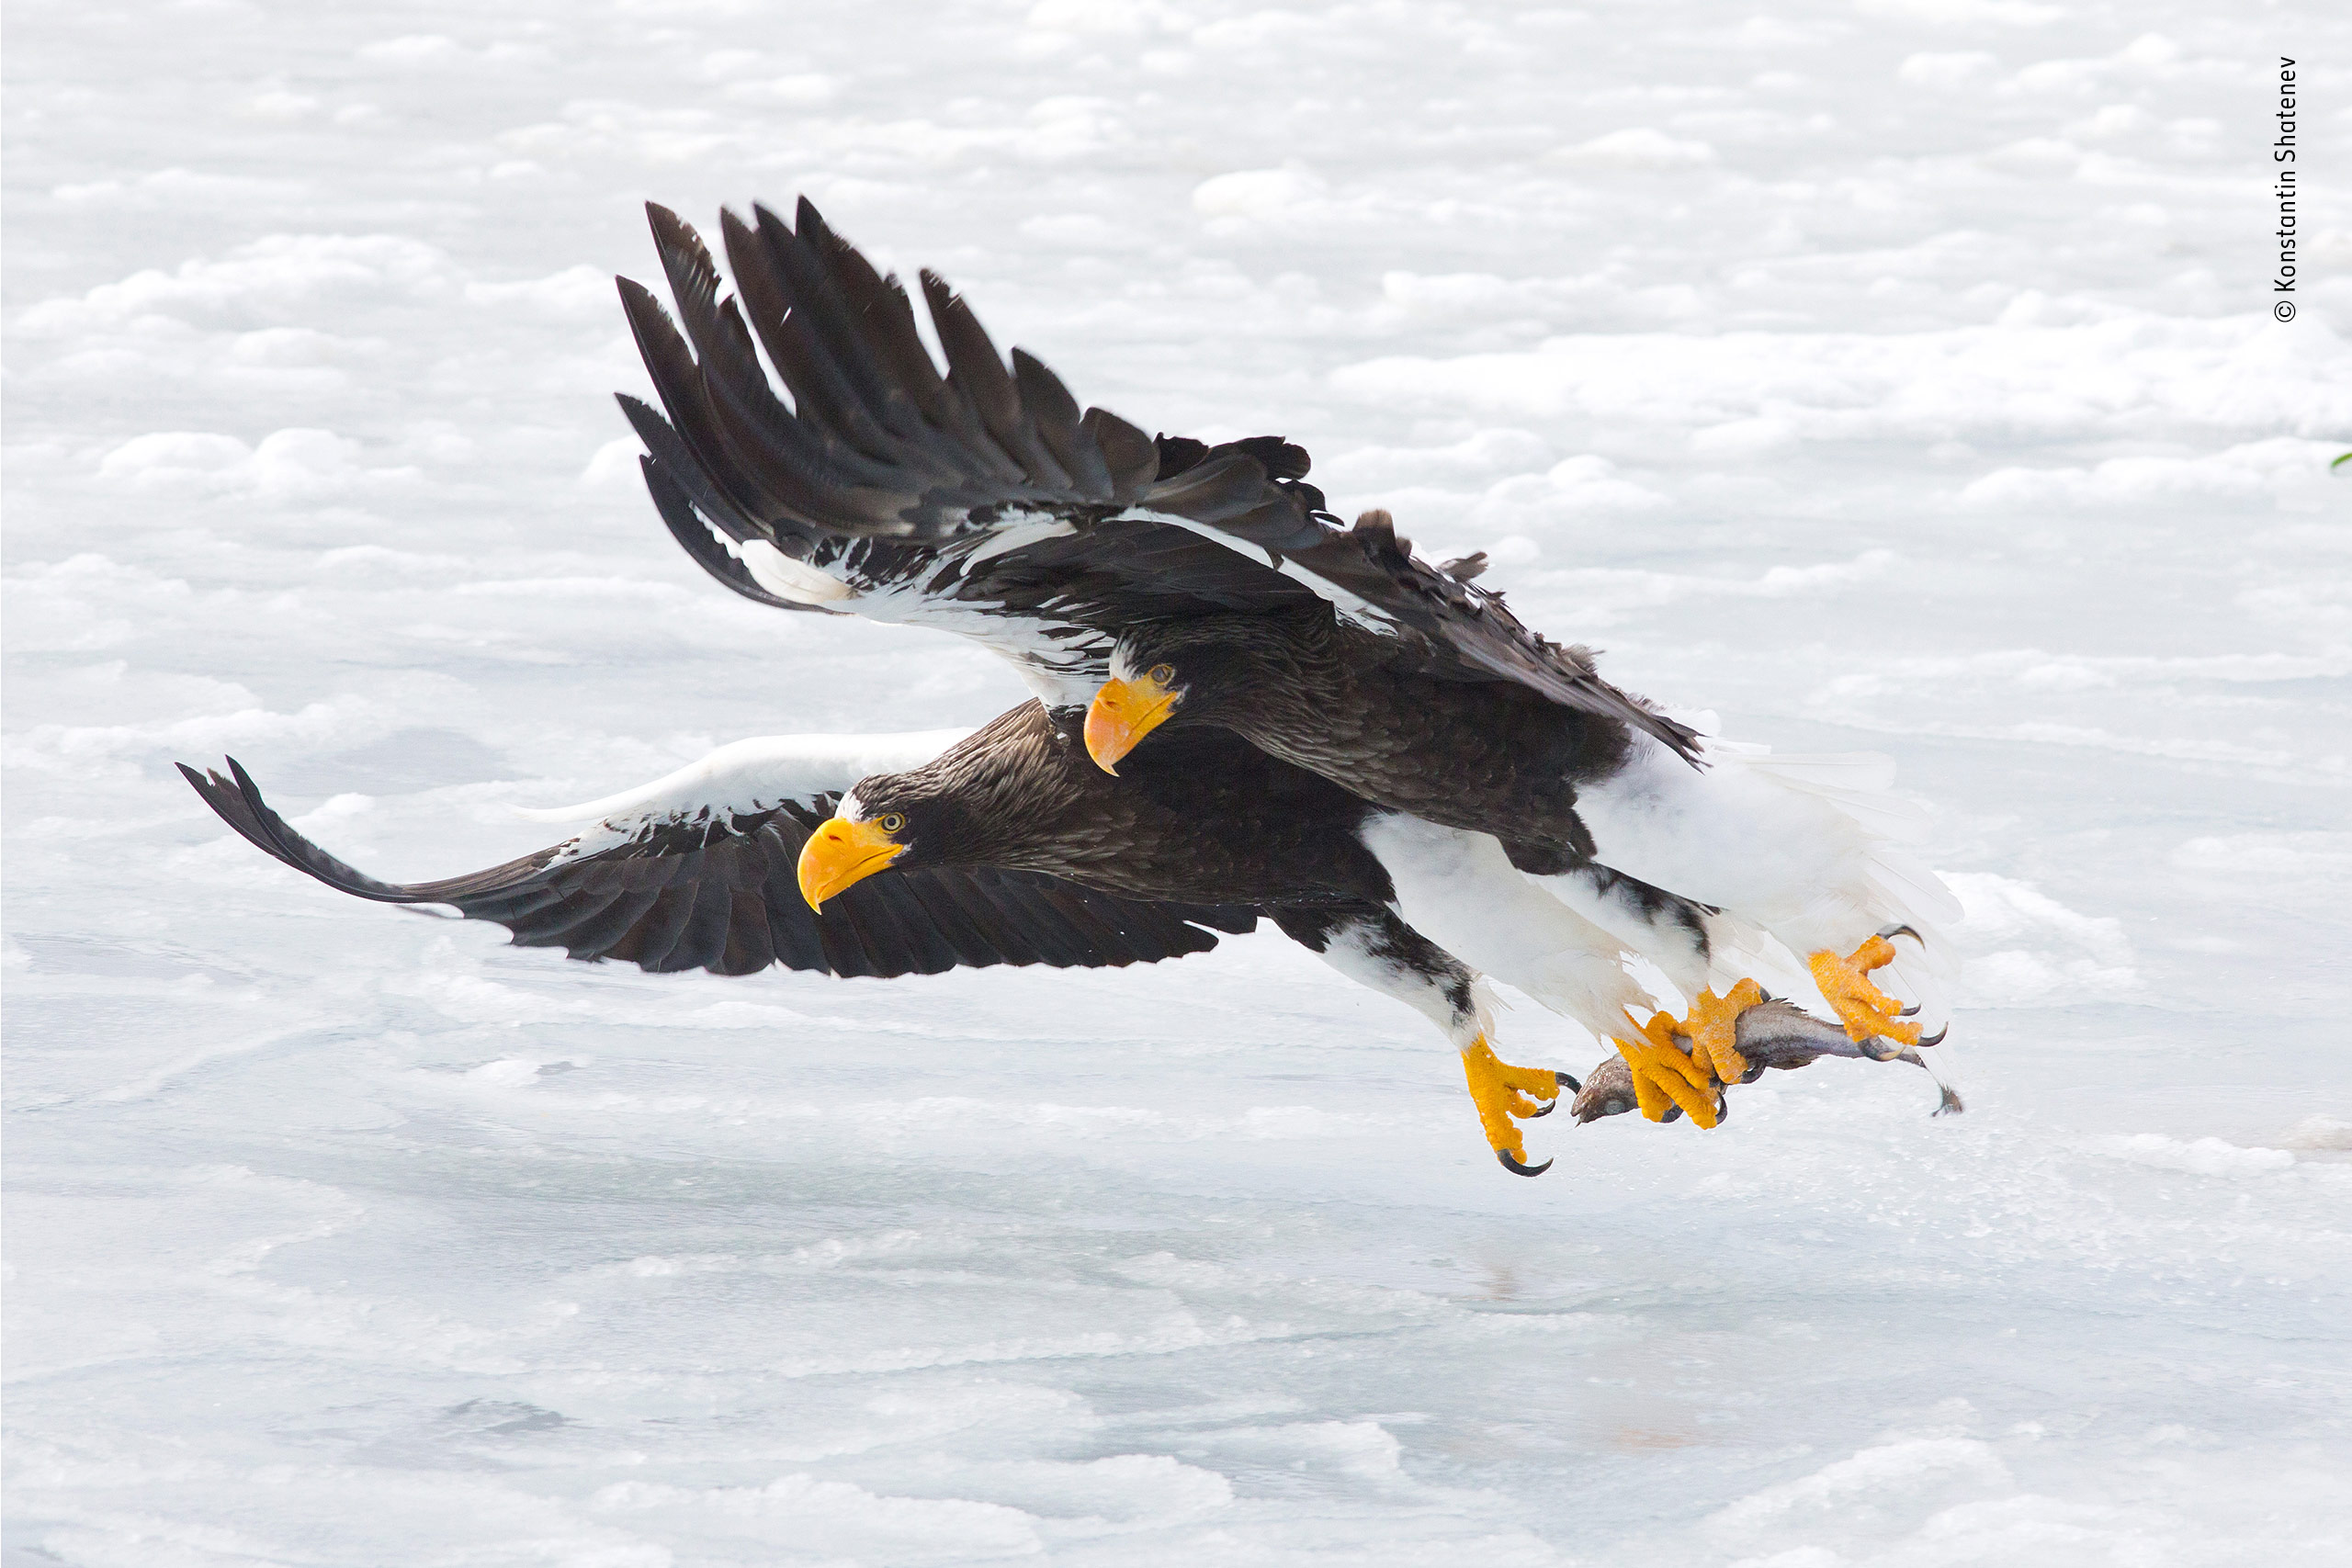 Two sea eagles carrying one fish